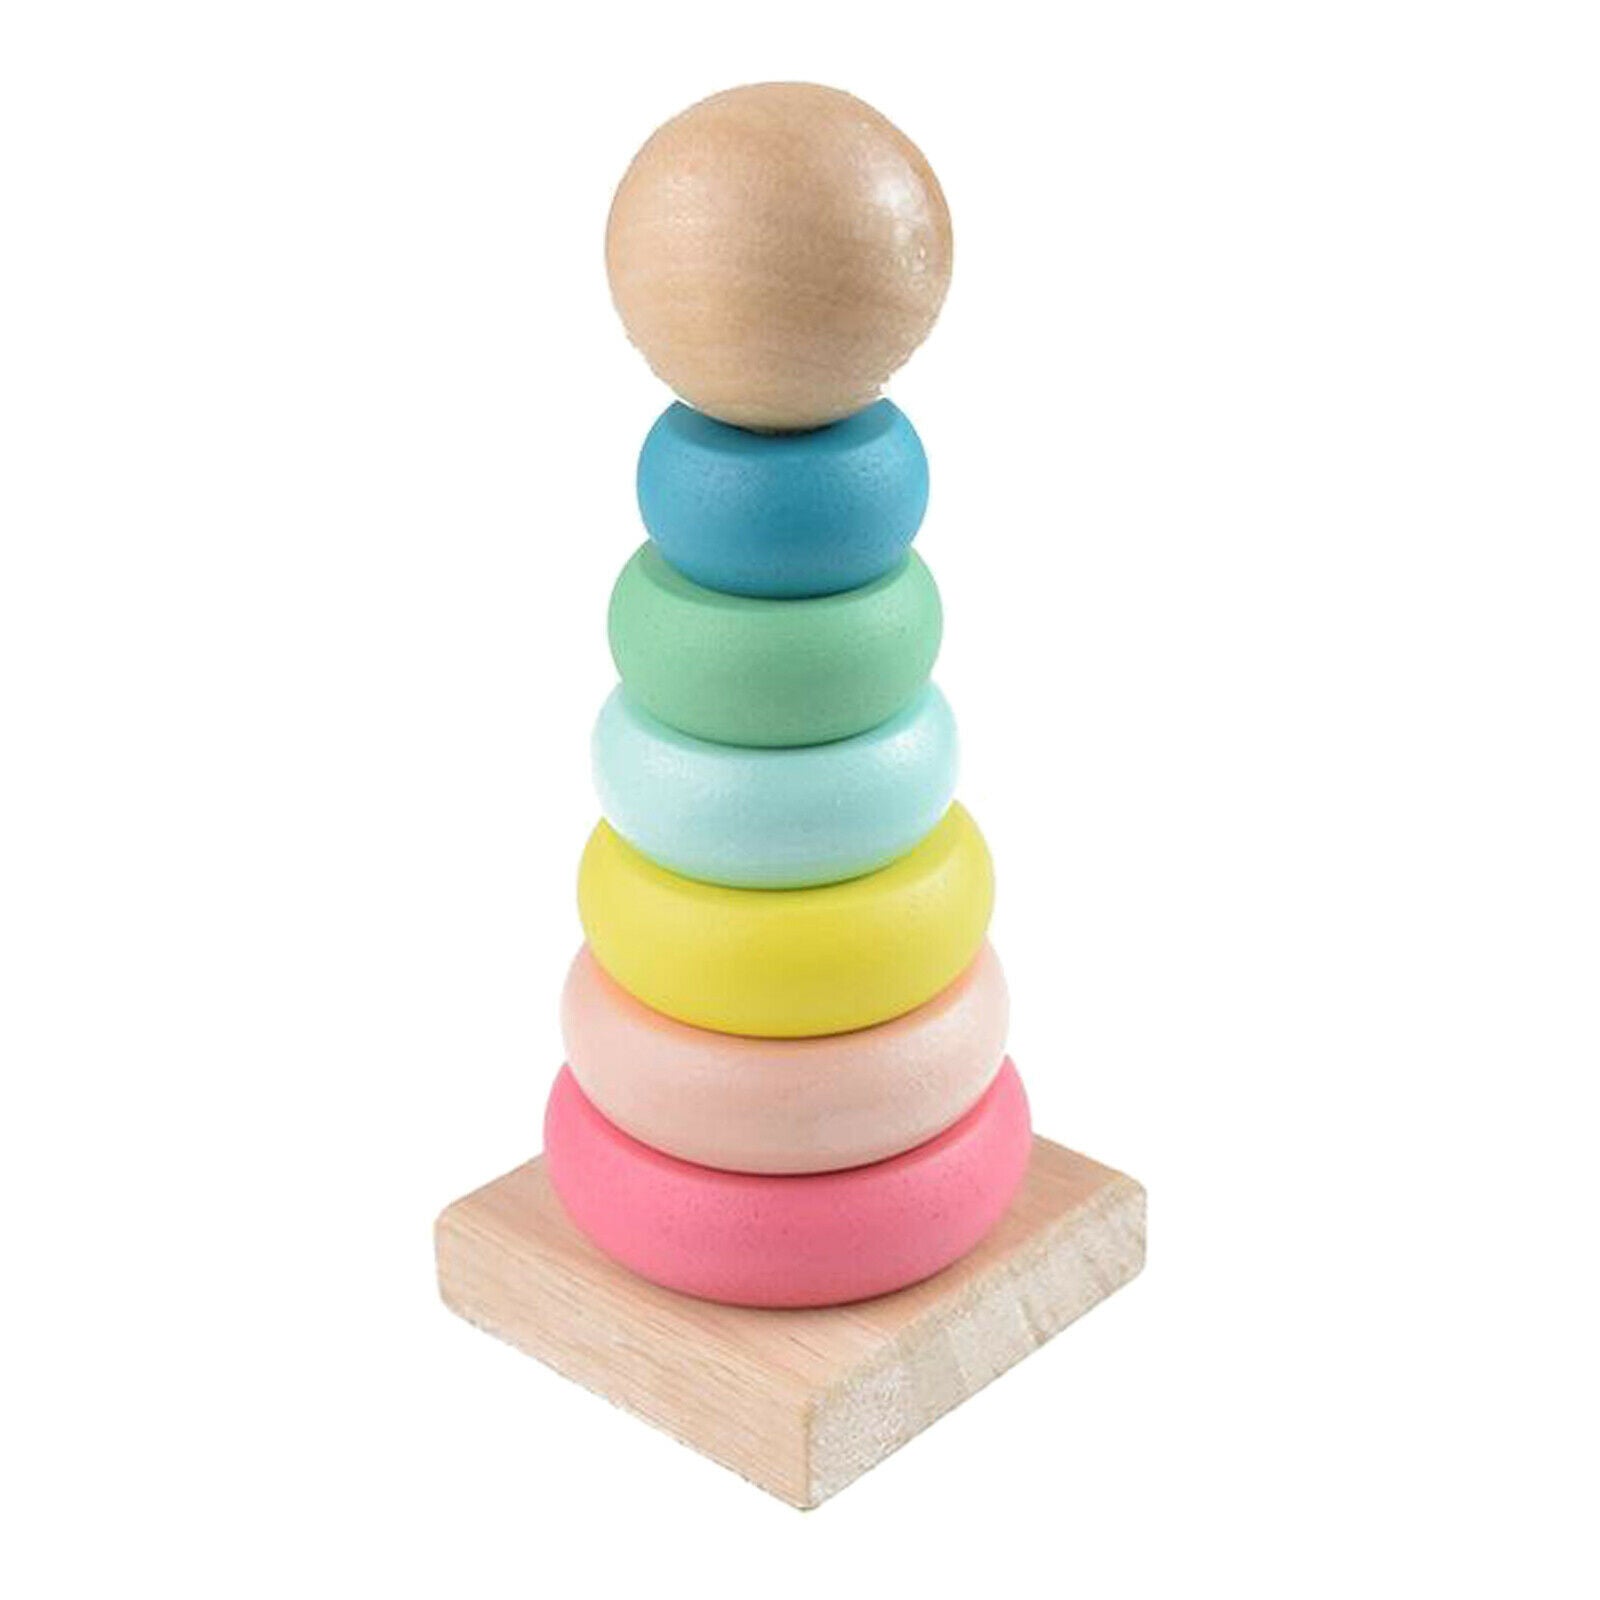 Colorful Rainbow Stacking Rings Learning Baby Toys for Kids Toddlers